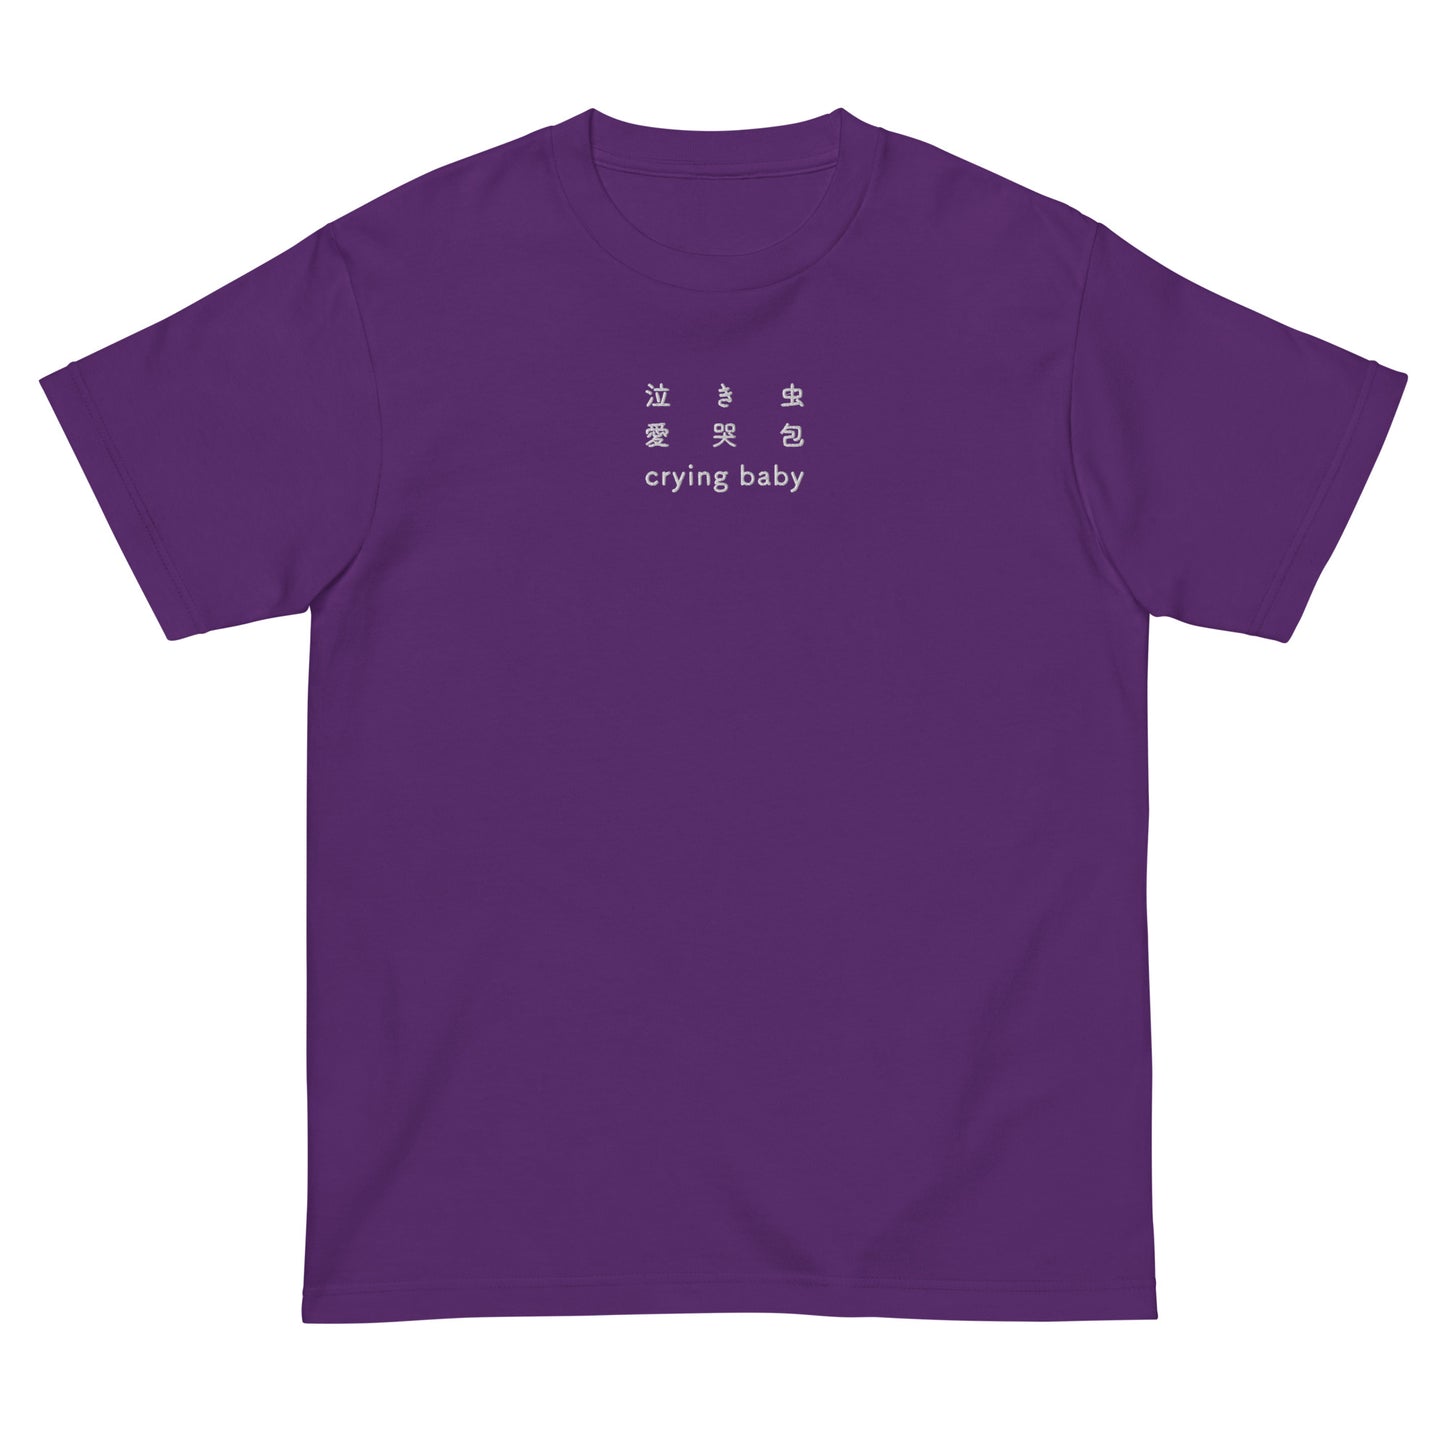 Purple High Quality Tee - Front Design with an White Embroidery "Crying Baby" in Japanese,Chinese and English